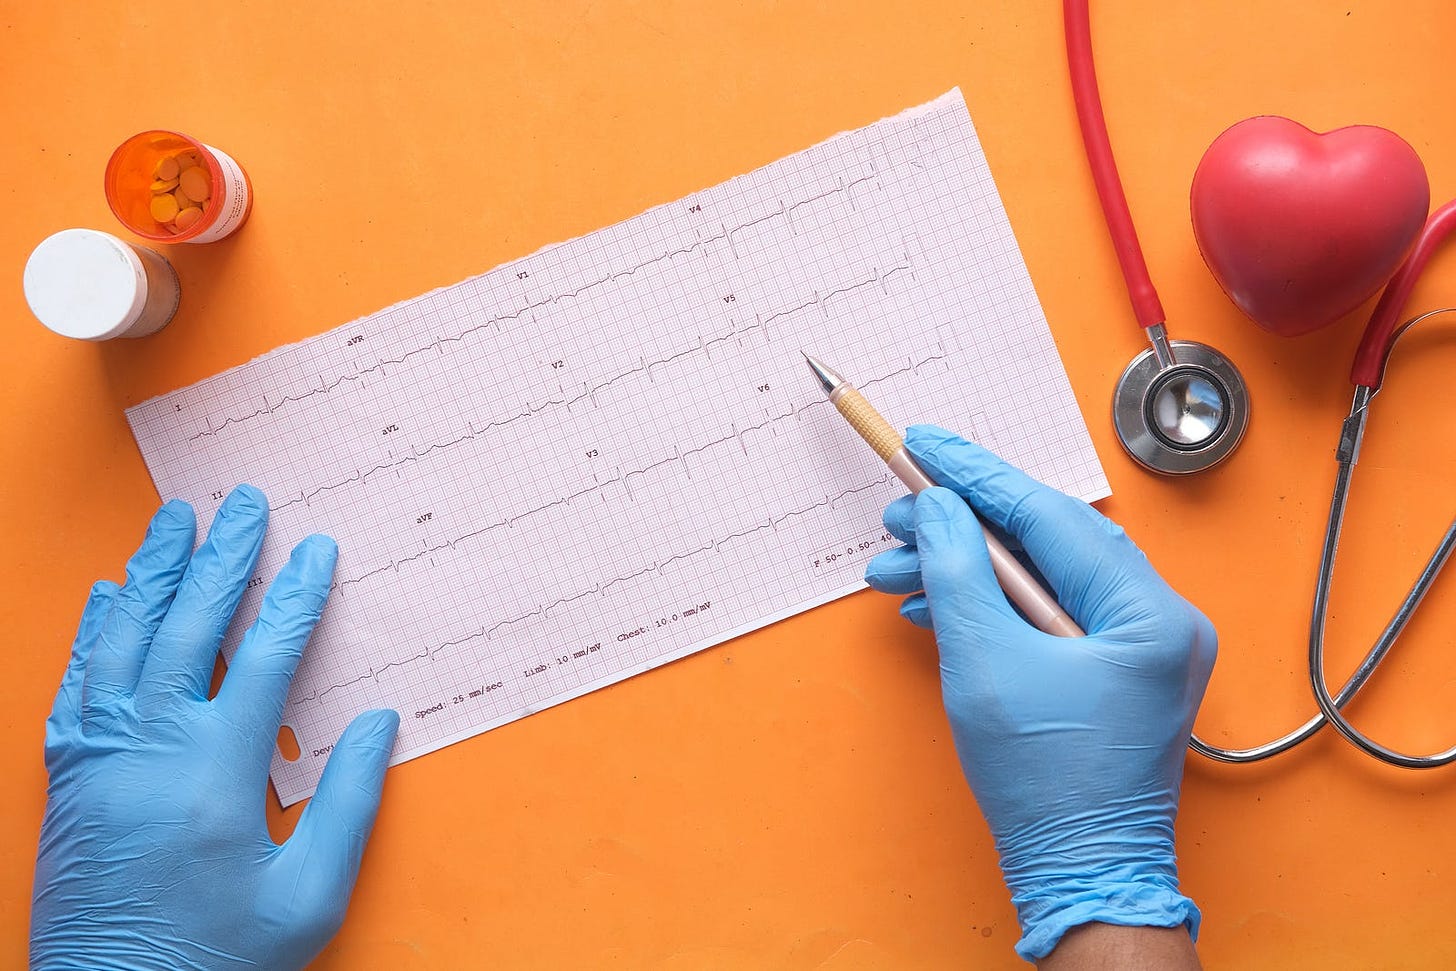 a top-down view of pair of hands wearing blue medical gloves writing on a medical document on an orange background. Two pill boxes sit on the top left of the image and there is a stephoscope on the right sitting next to a red heart-shaped object.